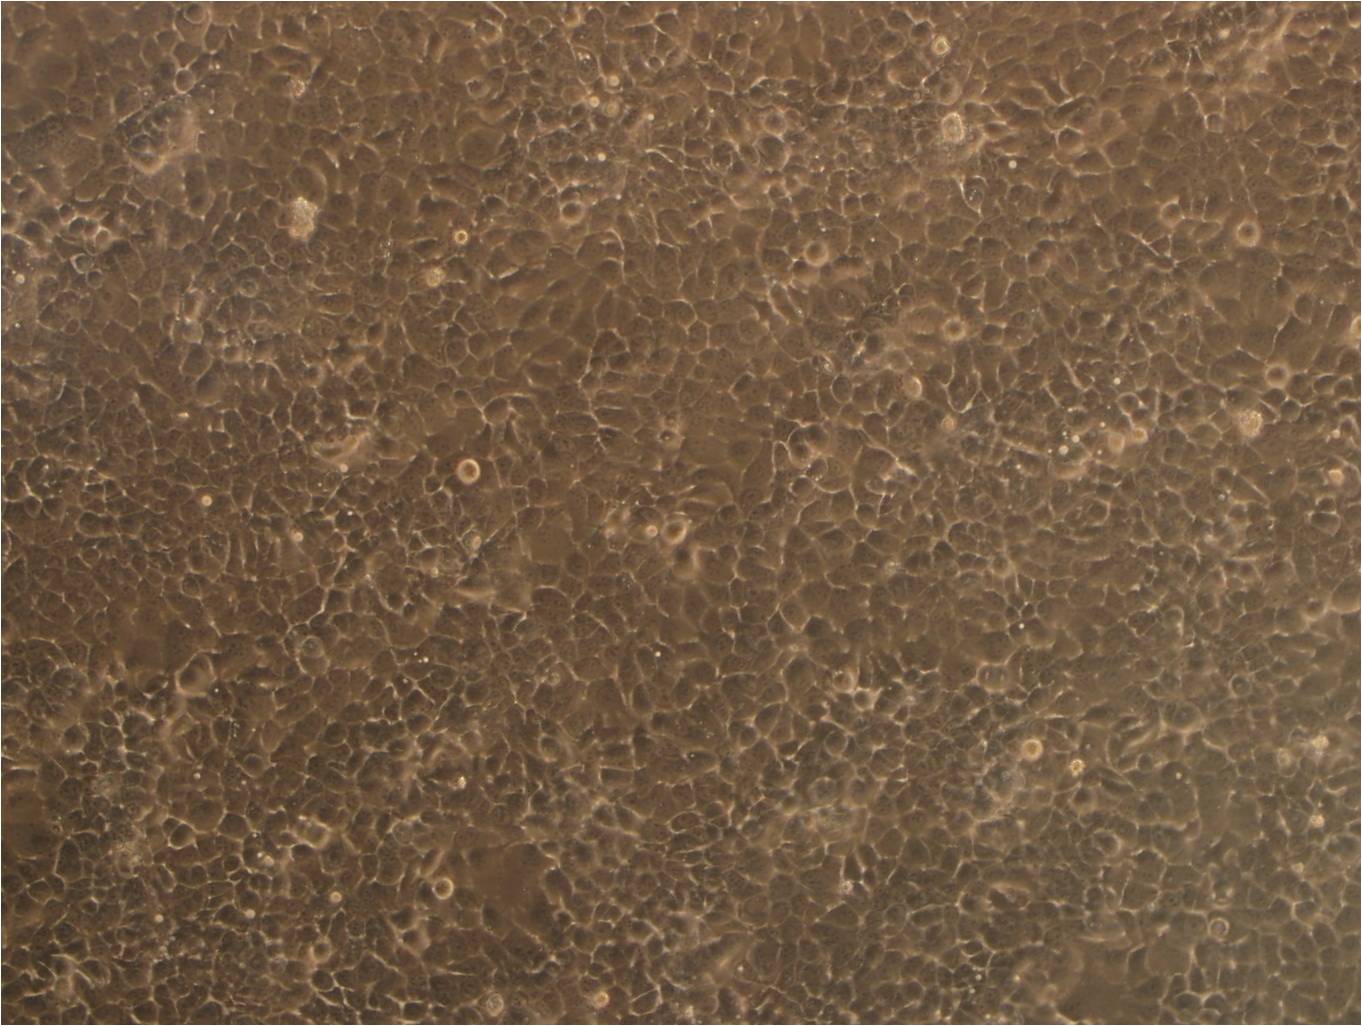 HCC1419 Epithelial Cell|人乳腺导管癌传代细胞(有STR鉴定),HCC1419 Epithelial Cell